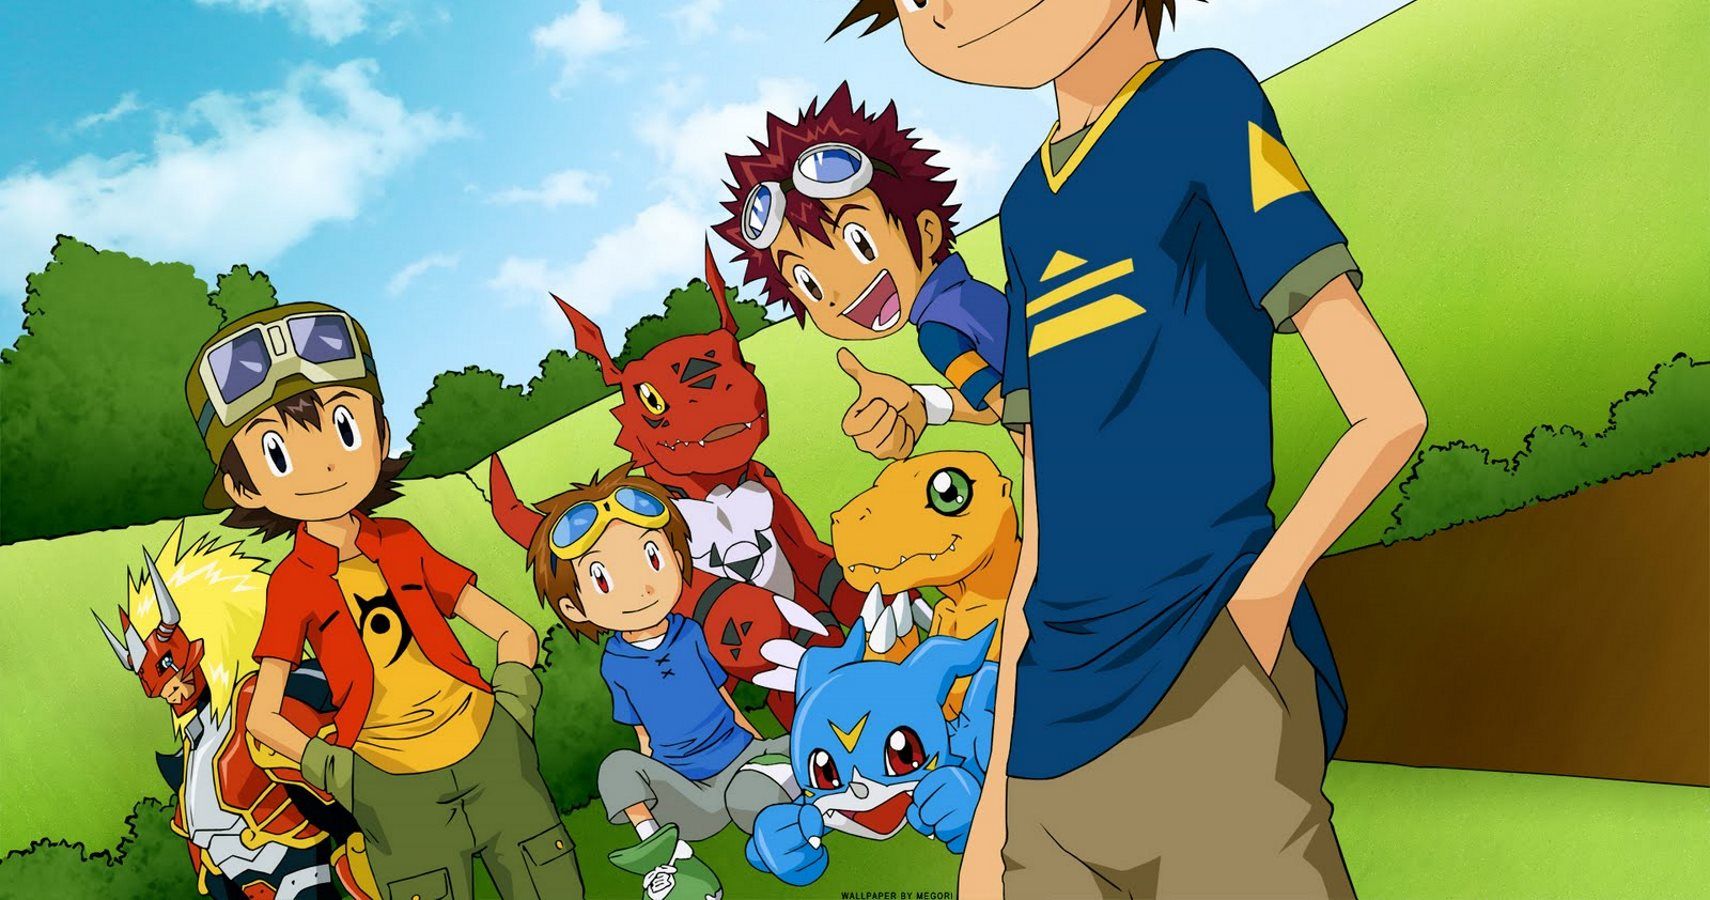 Developer Of China's Tinder-Like App Is Making A Digimon RPG